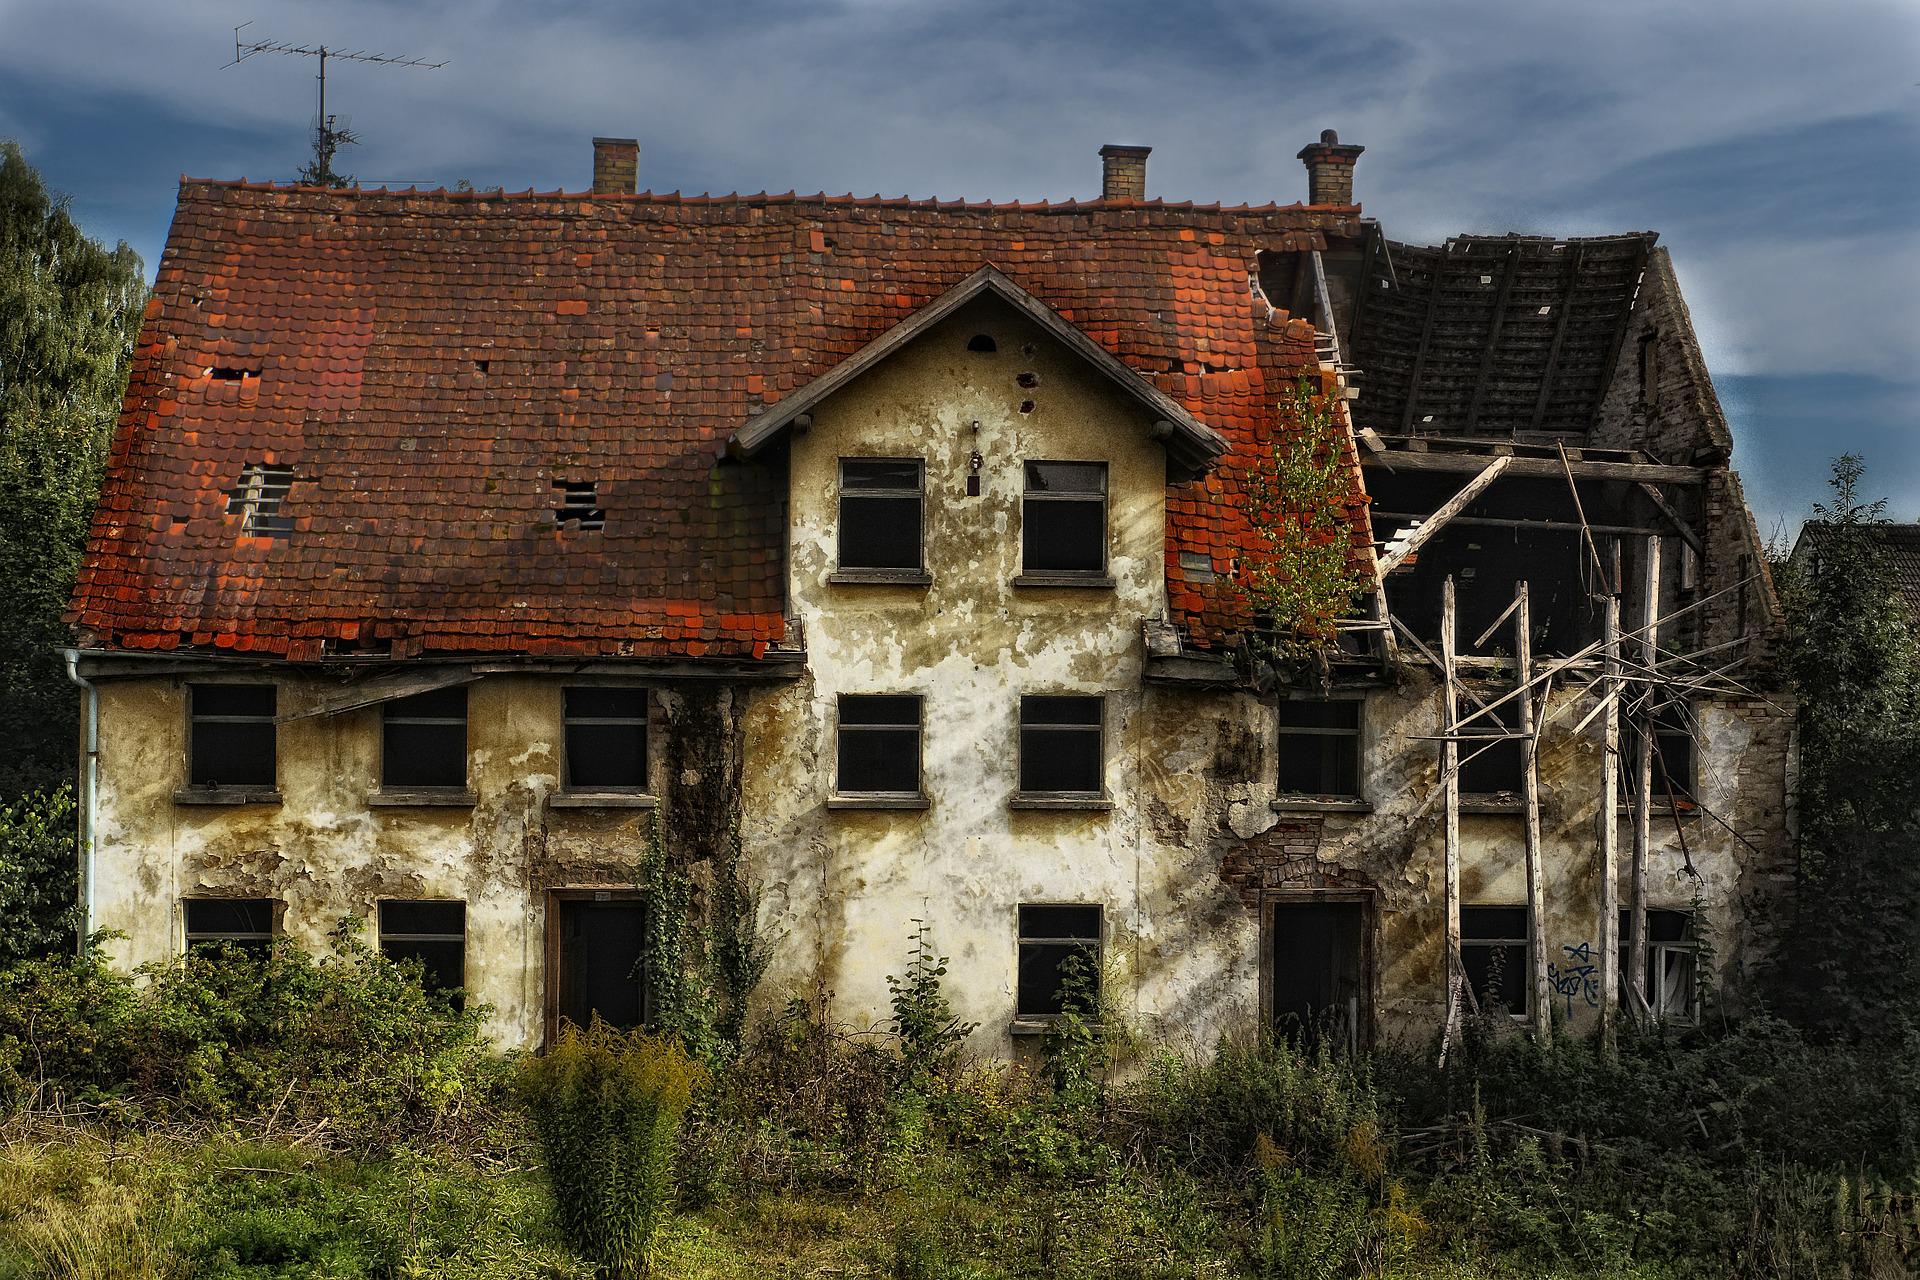 Can You Sell a Derelict Property?